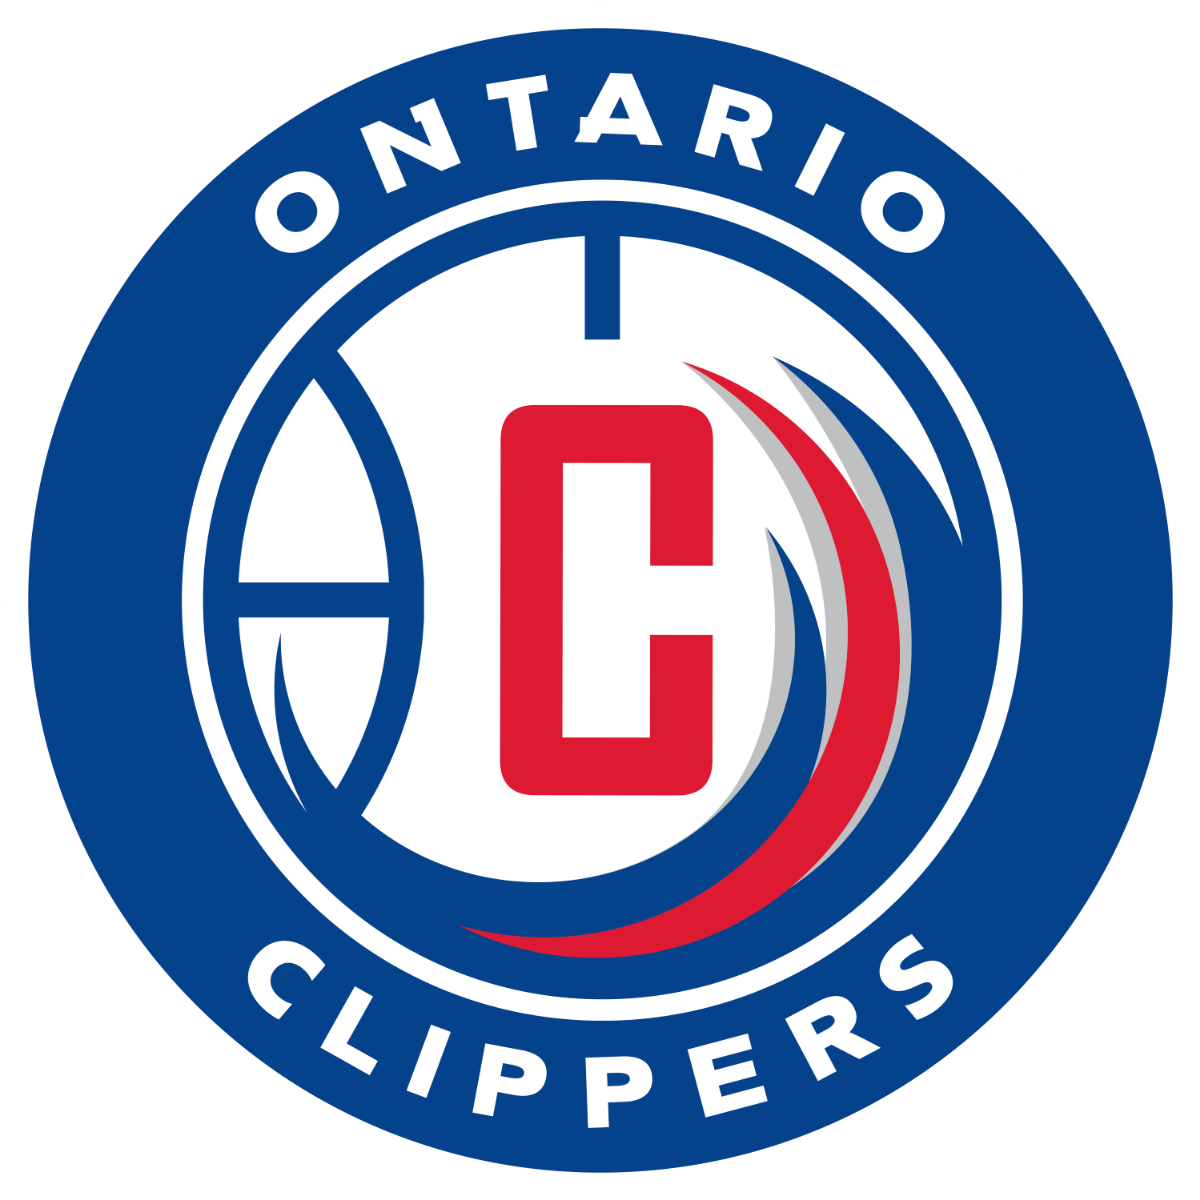 Ontario_Clippers_logo.svg.png